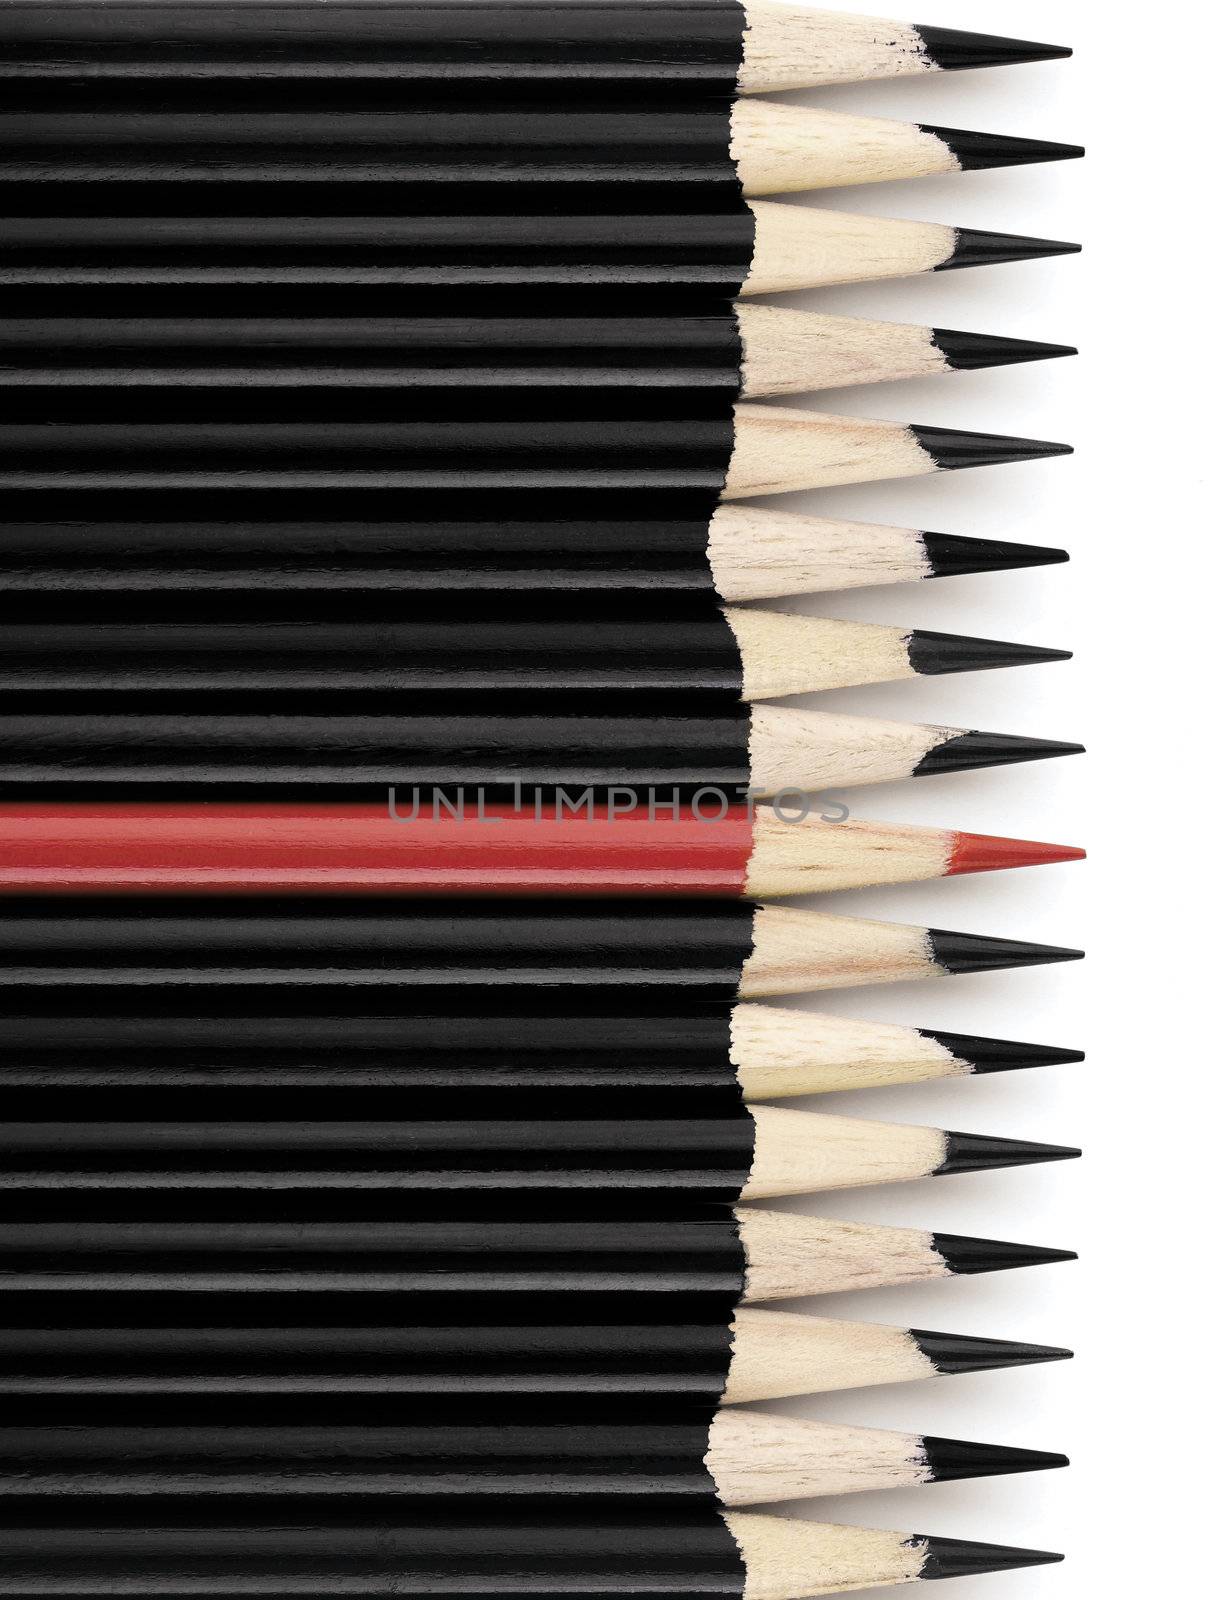 Red and Black Pencils by Em3